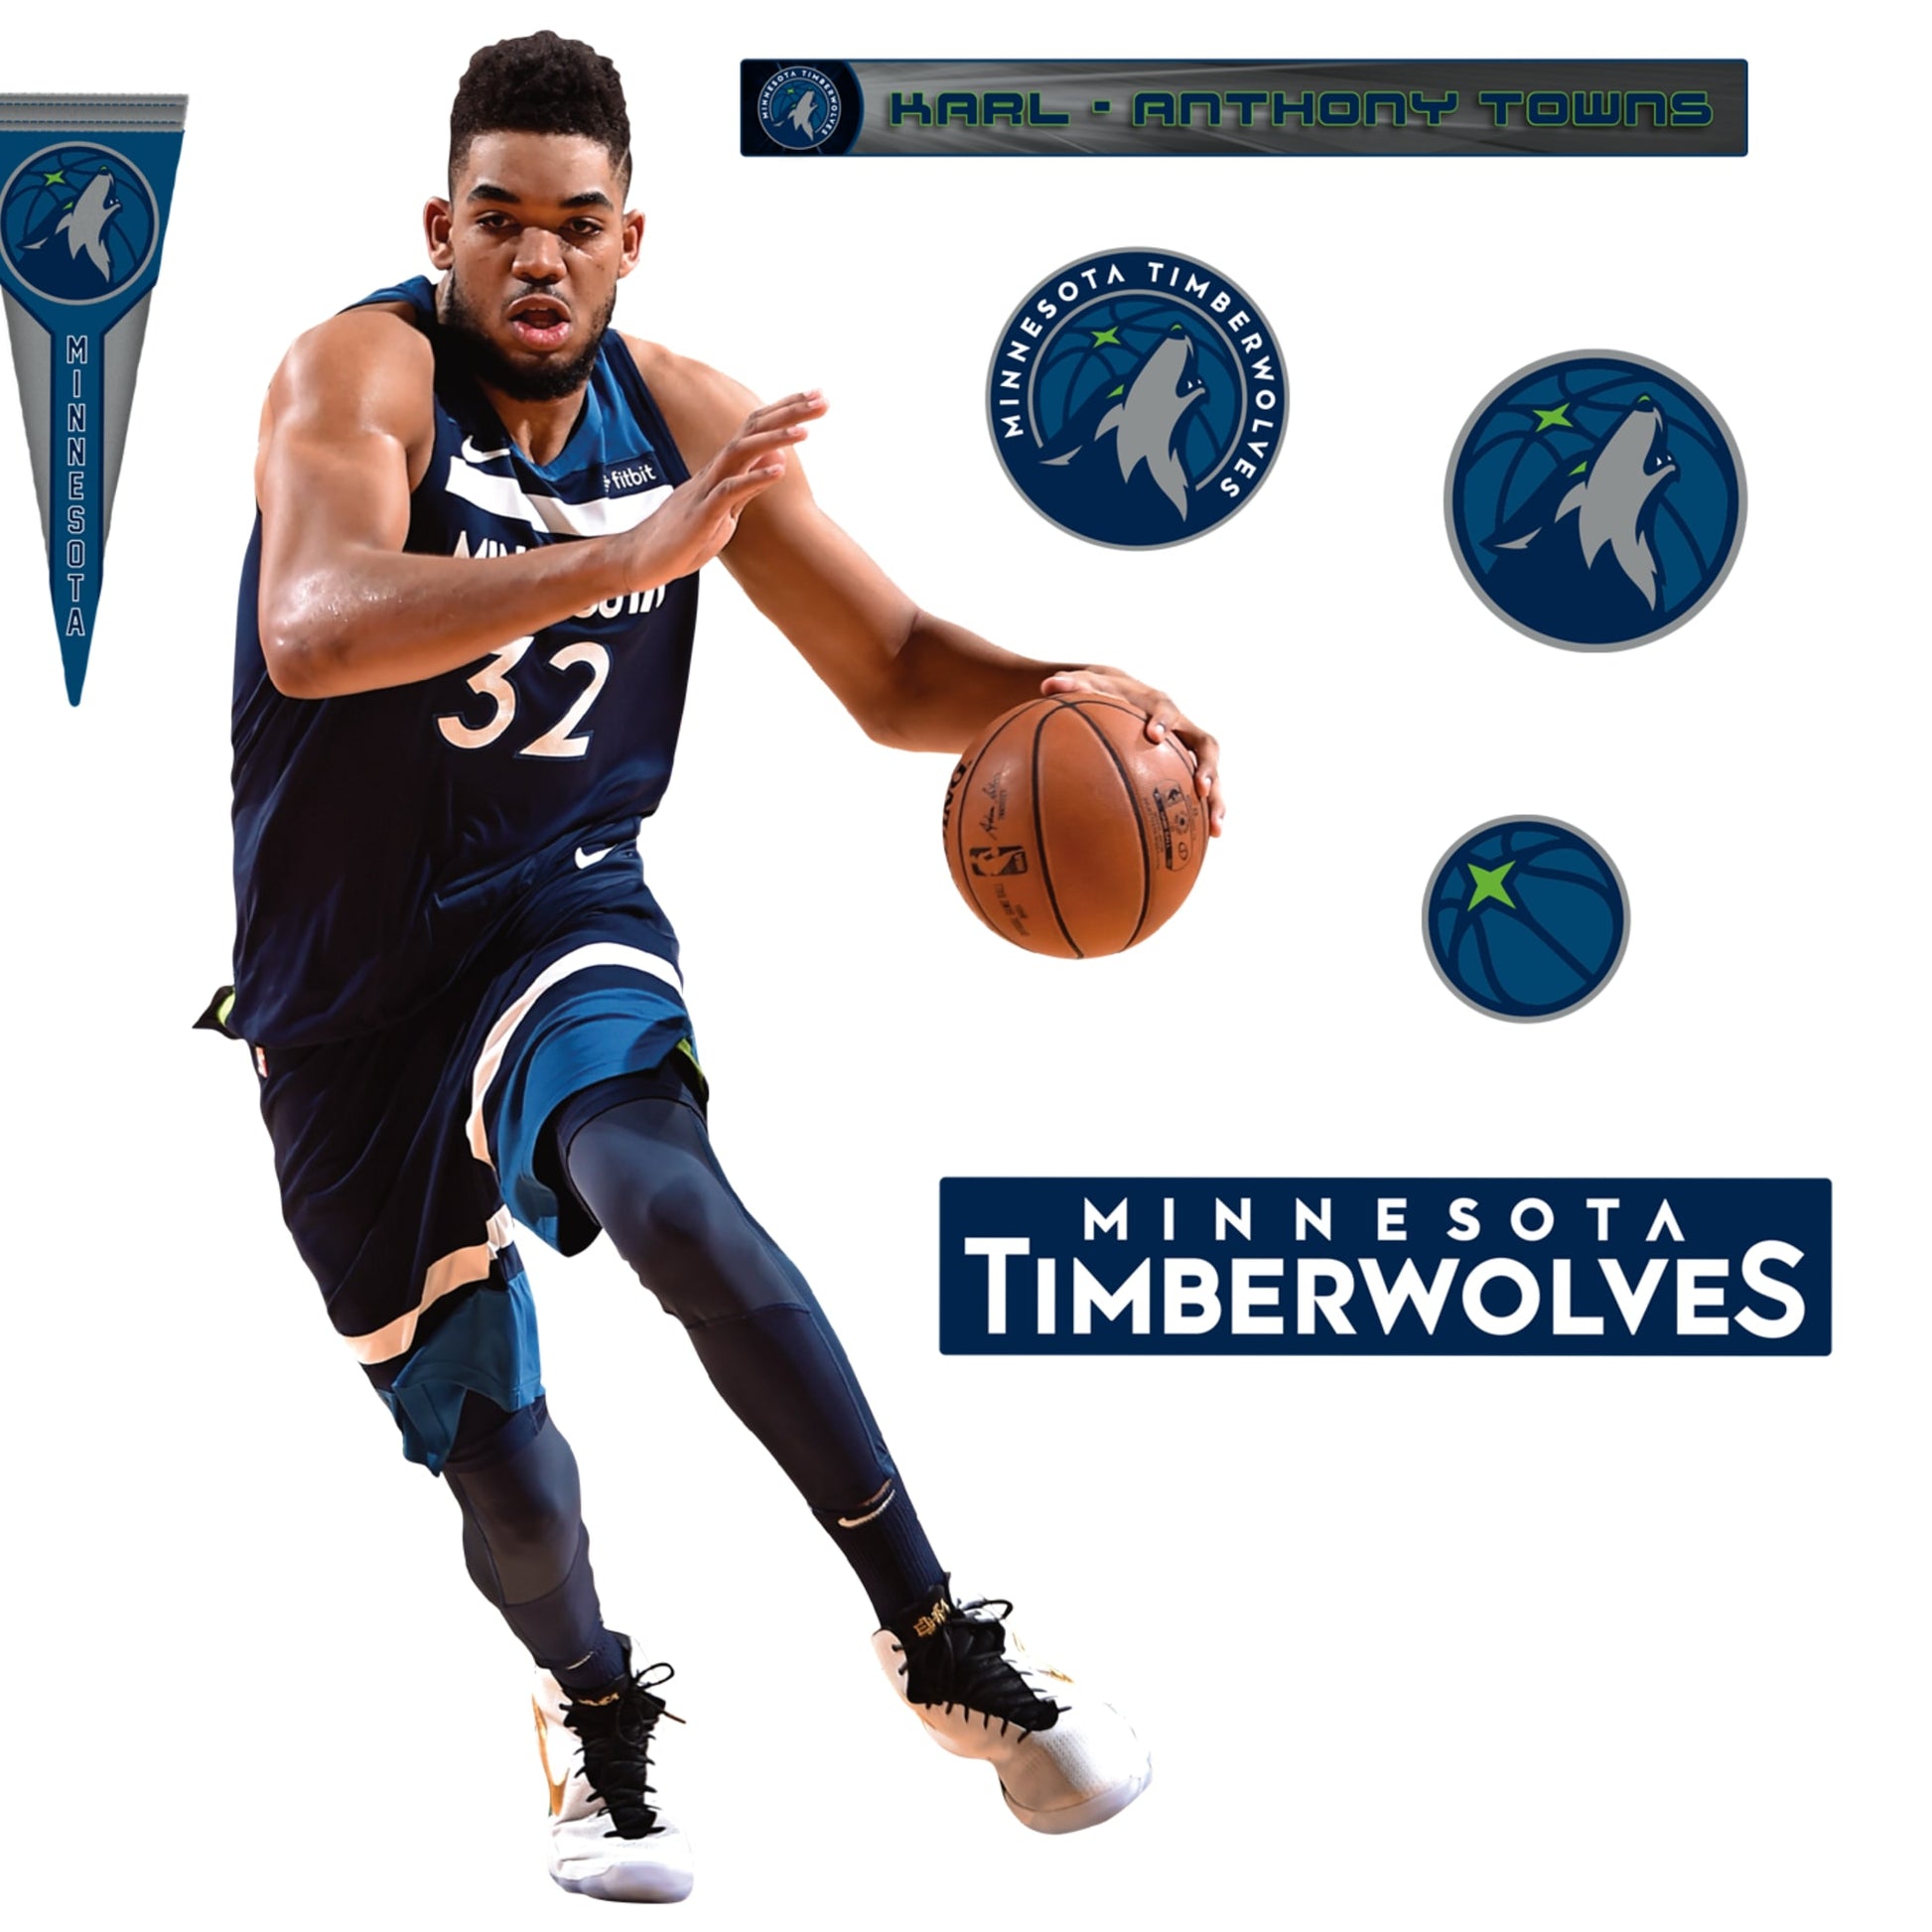 Fathead Karl-Anthony towns - X-Large Officially Licensed NBA Removable Wall Decal